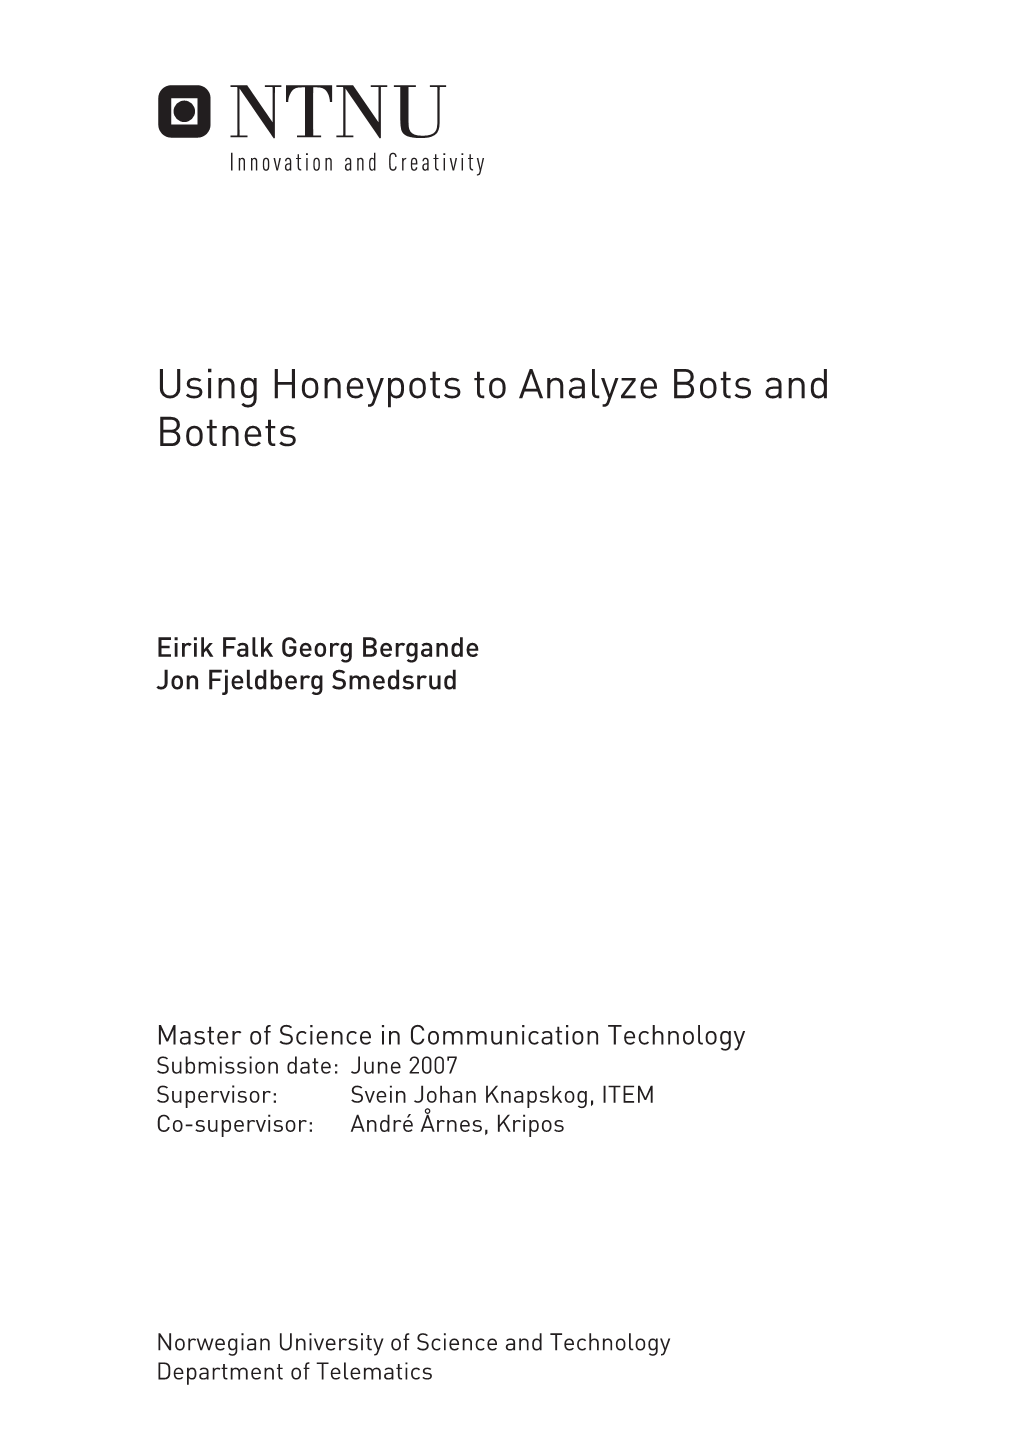 Using Honeypots to Analyze Bots and Botnets